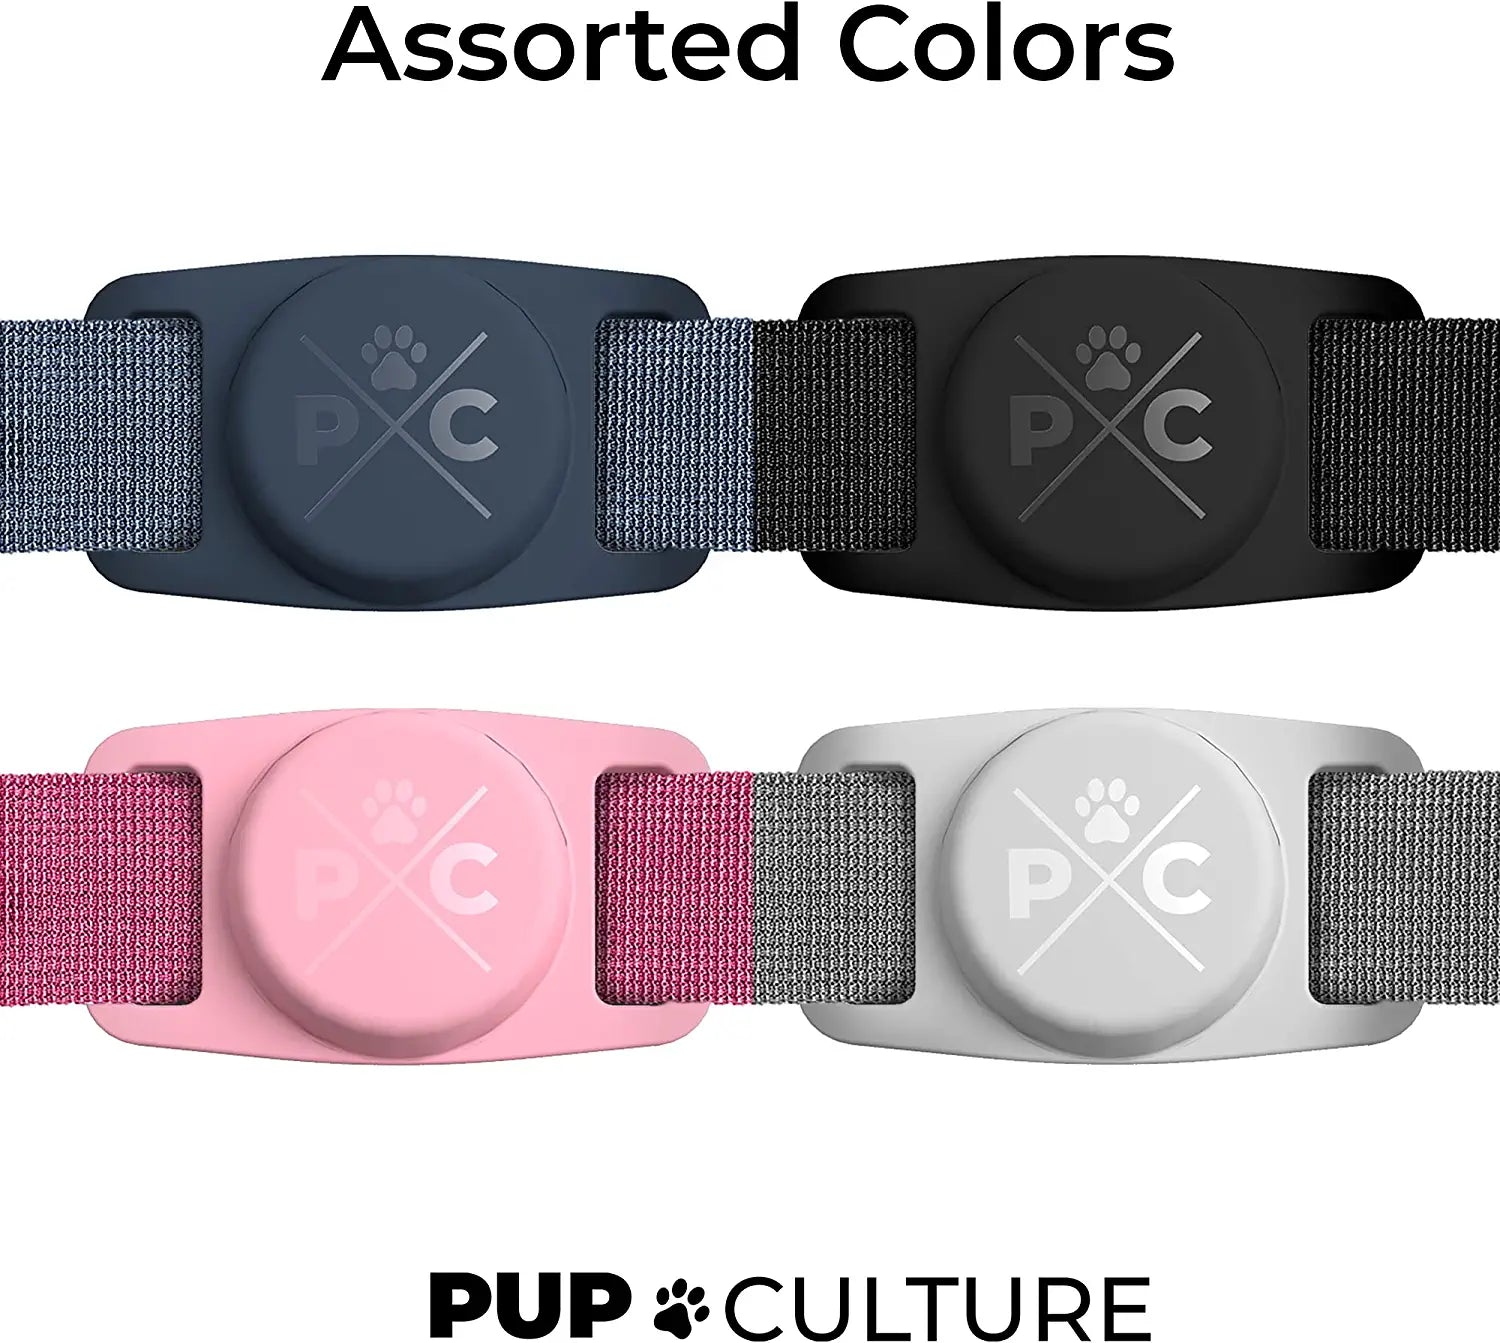 Pup Culture Airtag Dog Collar Holder, Protective Airtag Case for Dog Collar, Airtag Loop for GPS Dog Tracker, Dog Trackers for Apple Iphone, Airtag Pet, Dog Airtag Holder Electronics > GPS Accessories > GPS Cases Pup Culture   